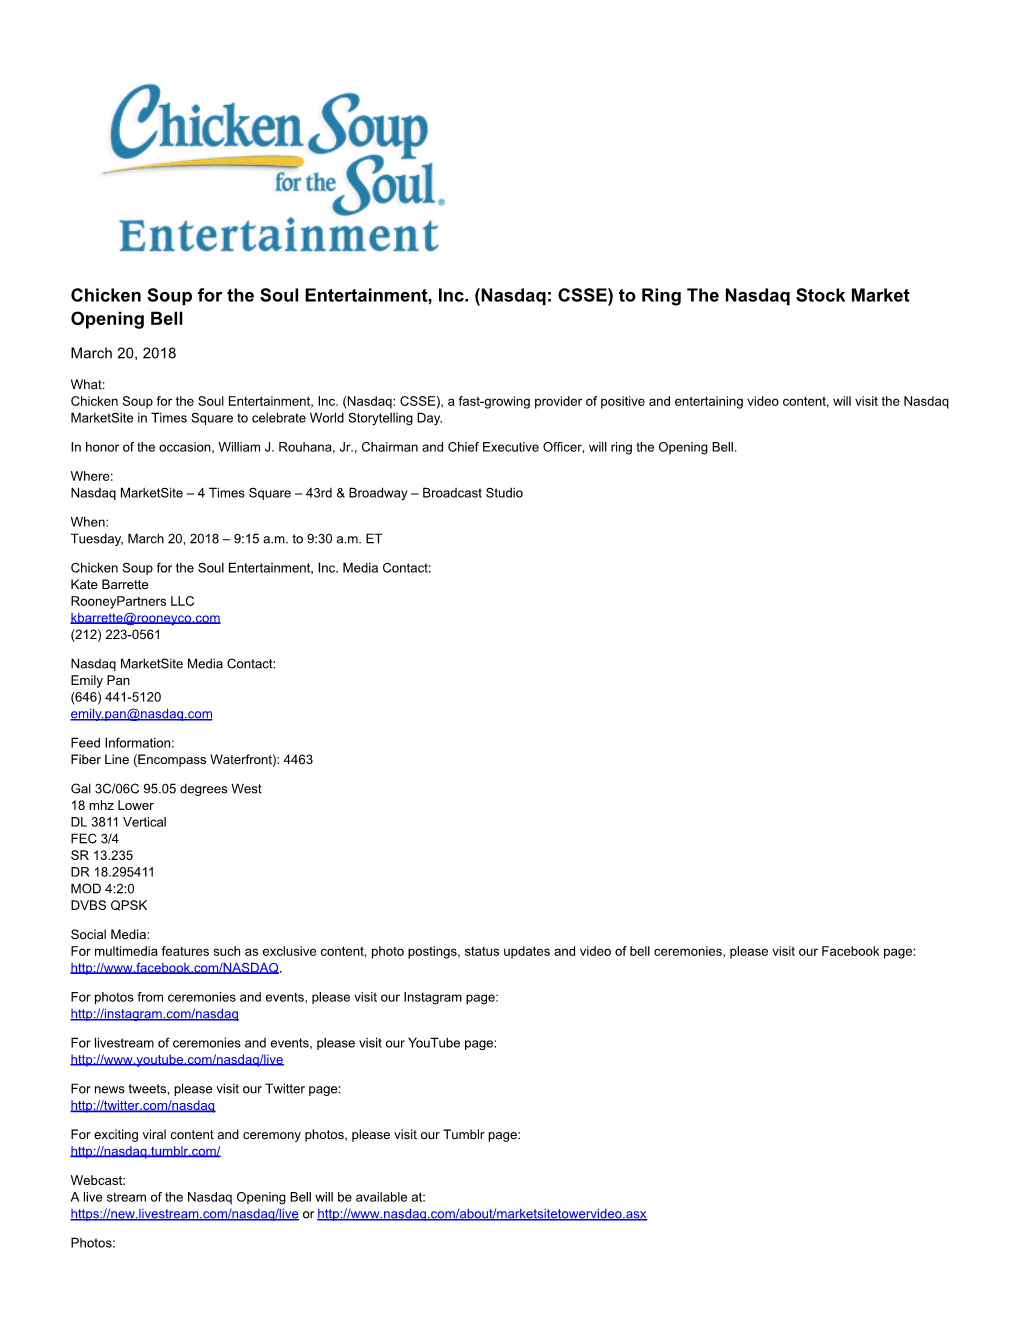 Chicken Soup for the Soul Entertainment, Inc. (Nasdaq: CSSE) to Ring the Nasdaq Stock Market Opening Bell